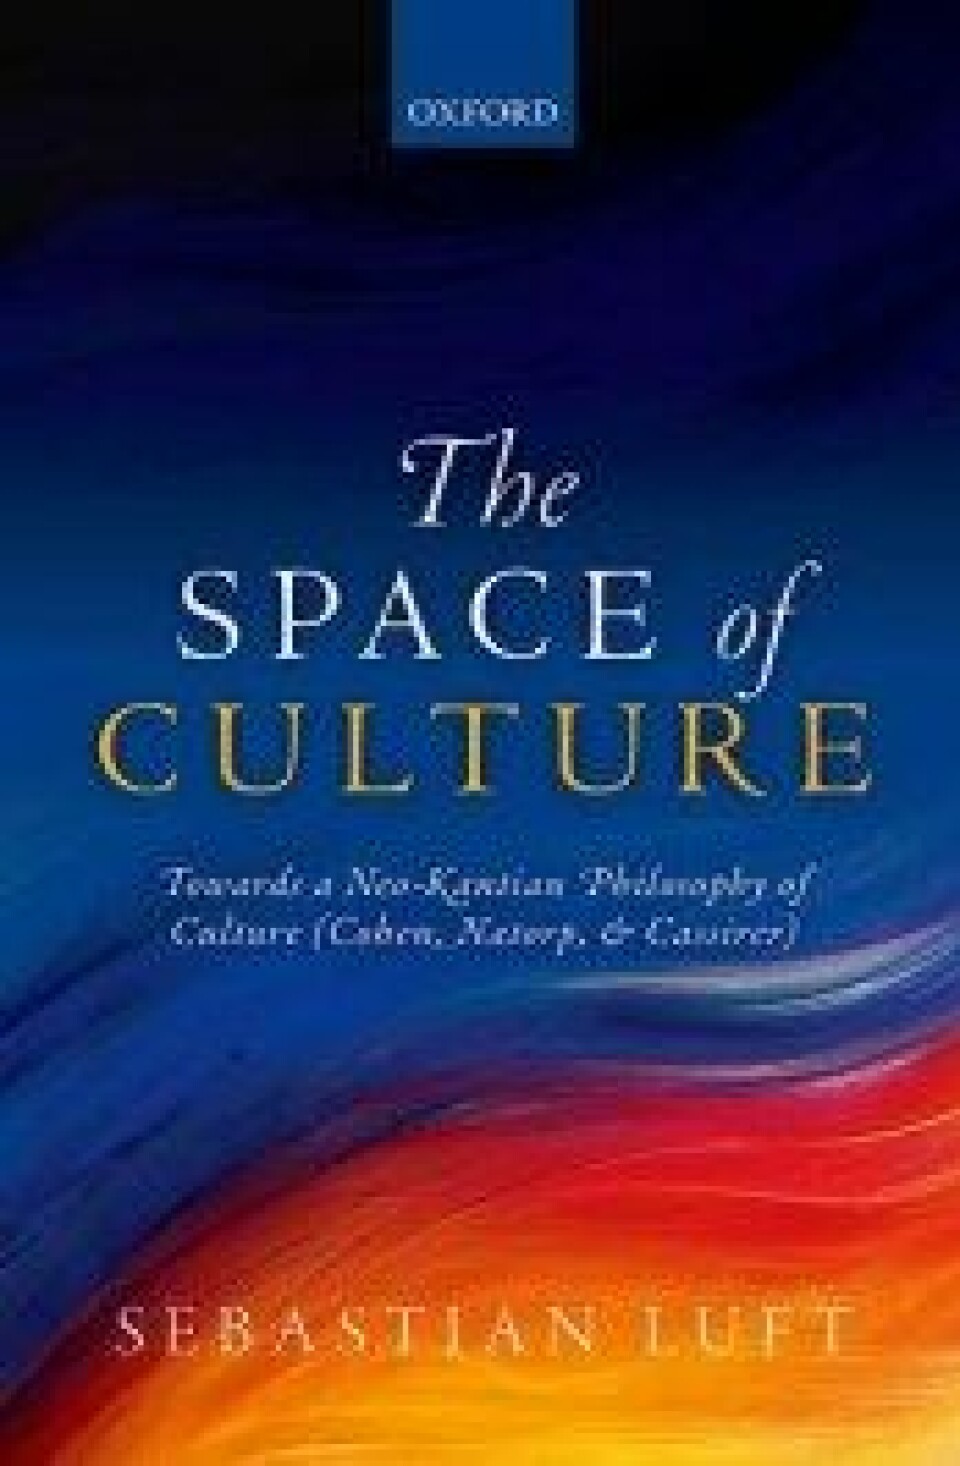 The Space of Culture. Towards a Neo-Kantian Philosophy of Culture (Cohen, Natorp & Cassirer), Sebastian Luft, Oxford University Press, 2015.